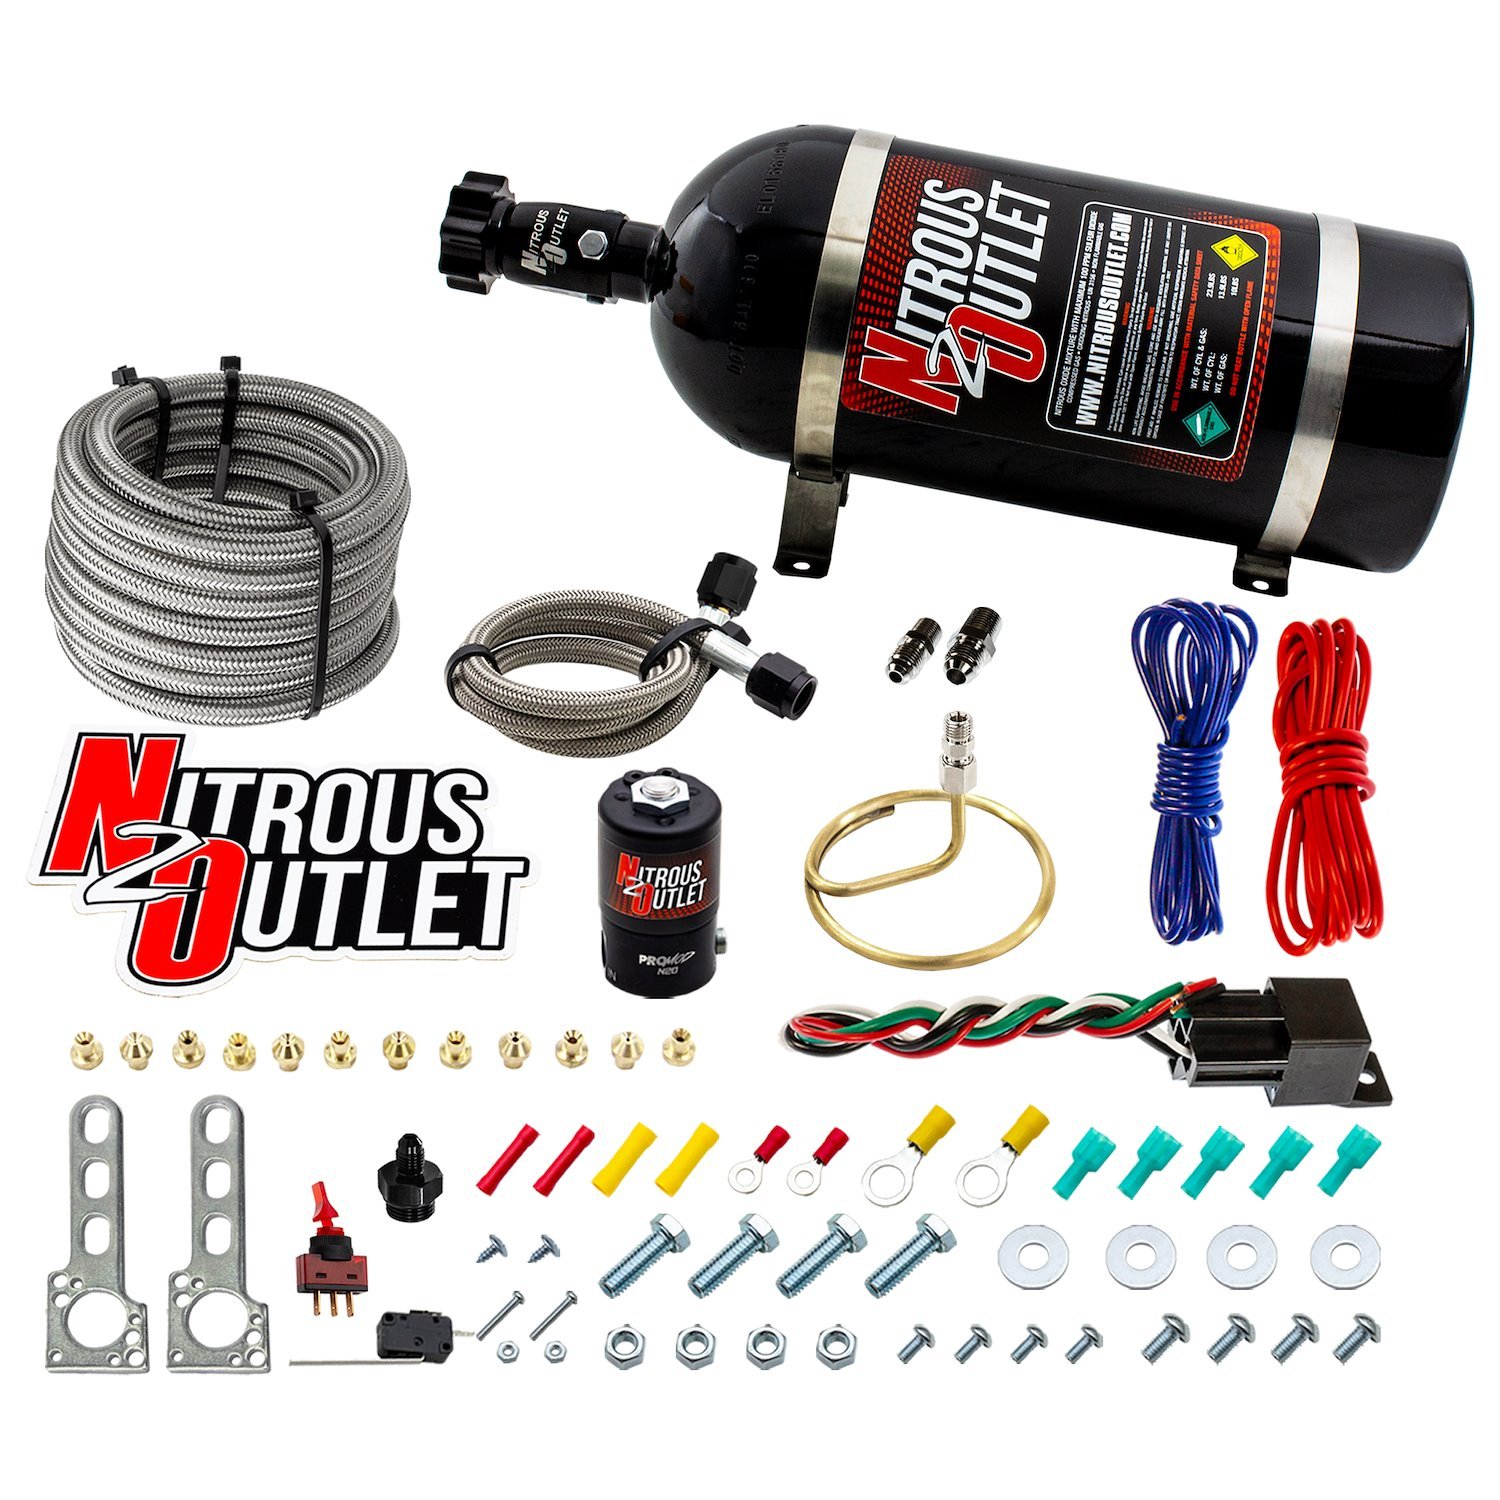 00-10202-10 Universal EFI Dry Small Distribution Ring System, 35-200HP, 10lb Bottle